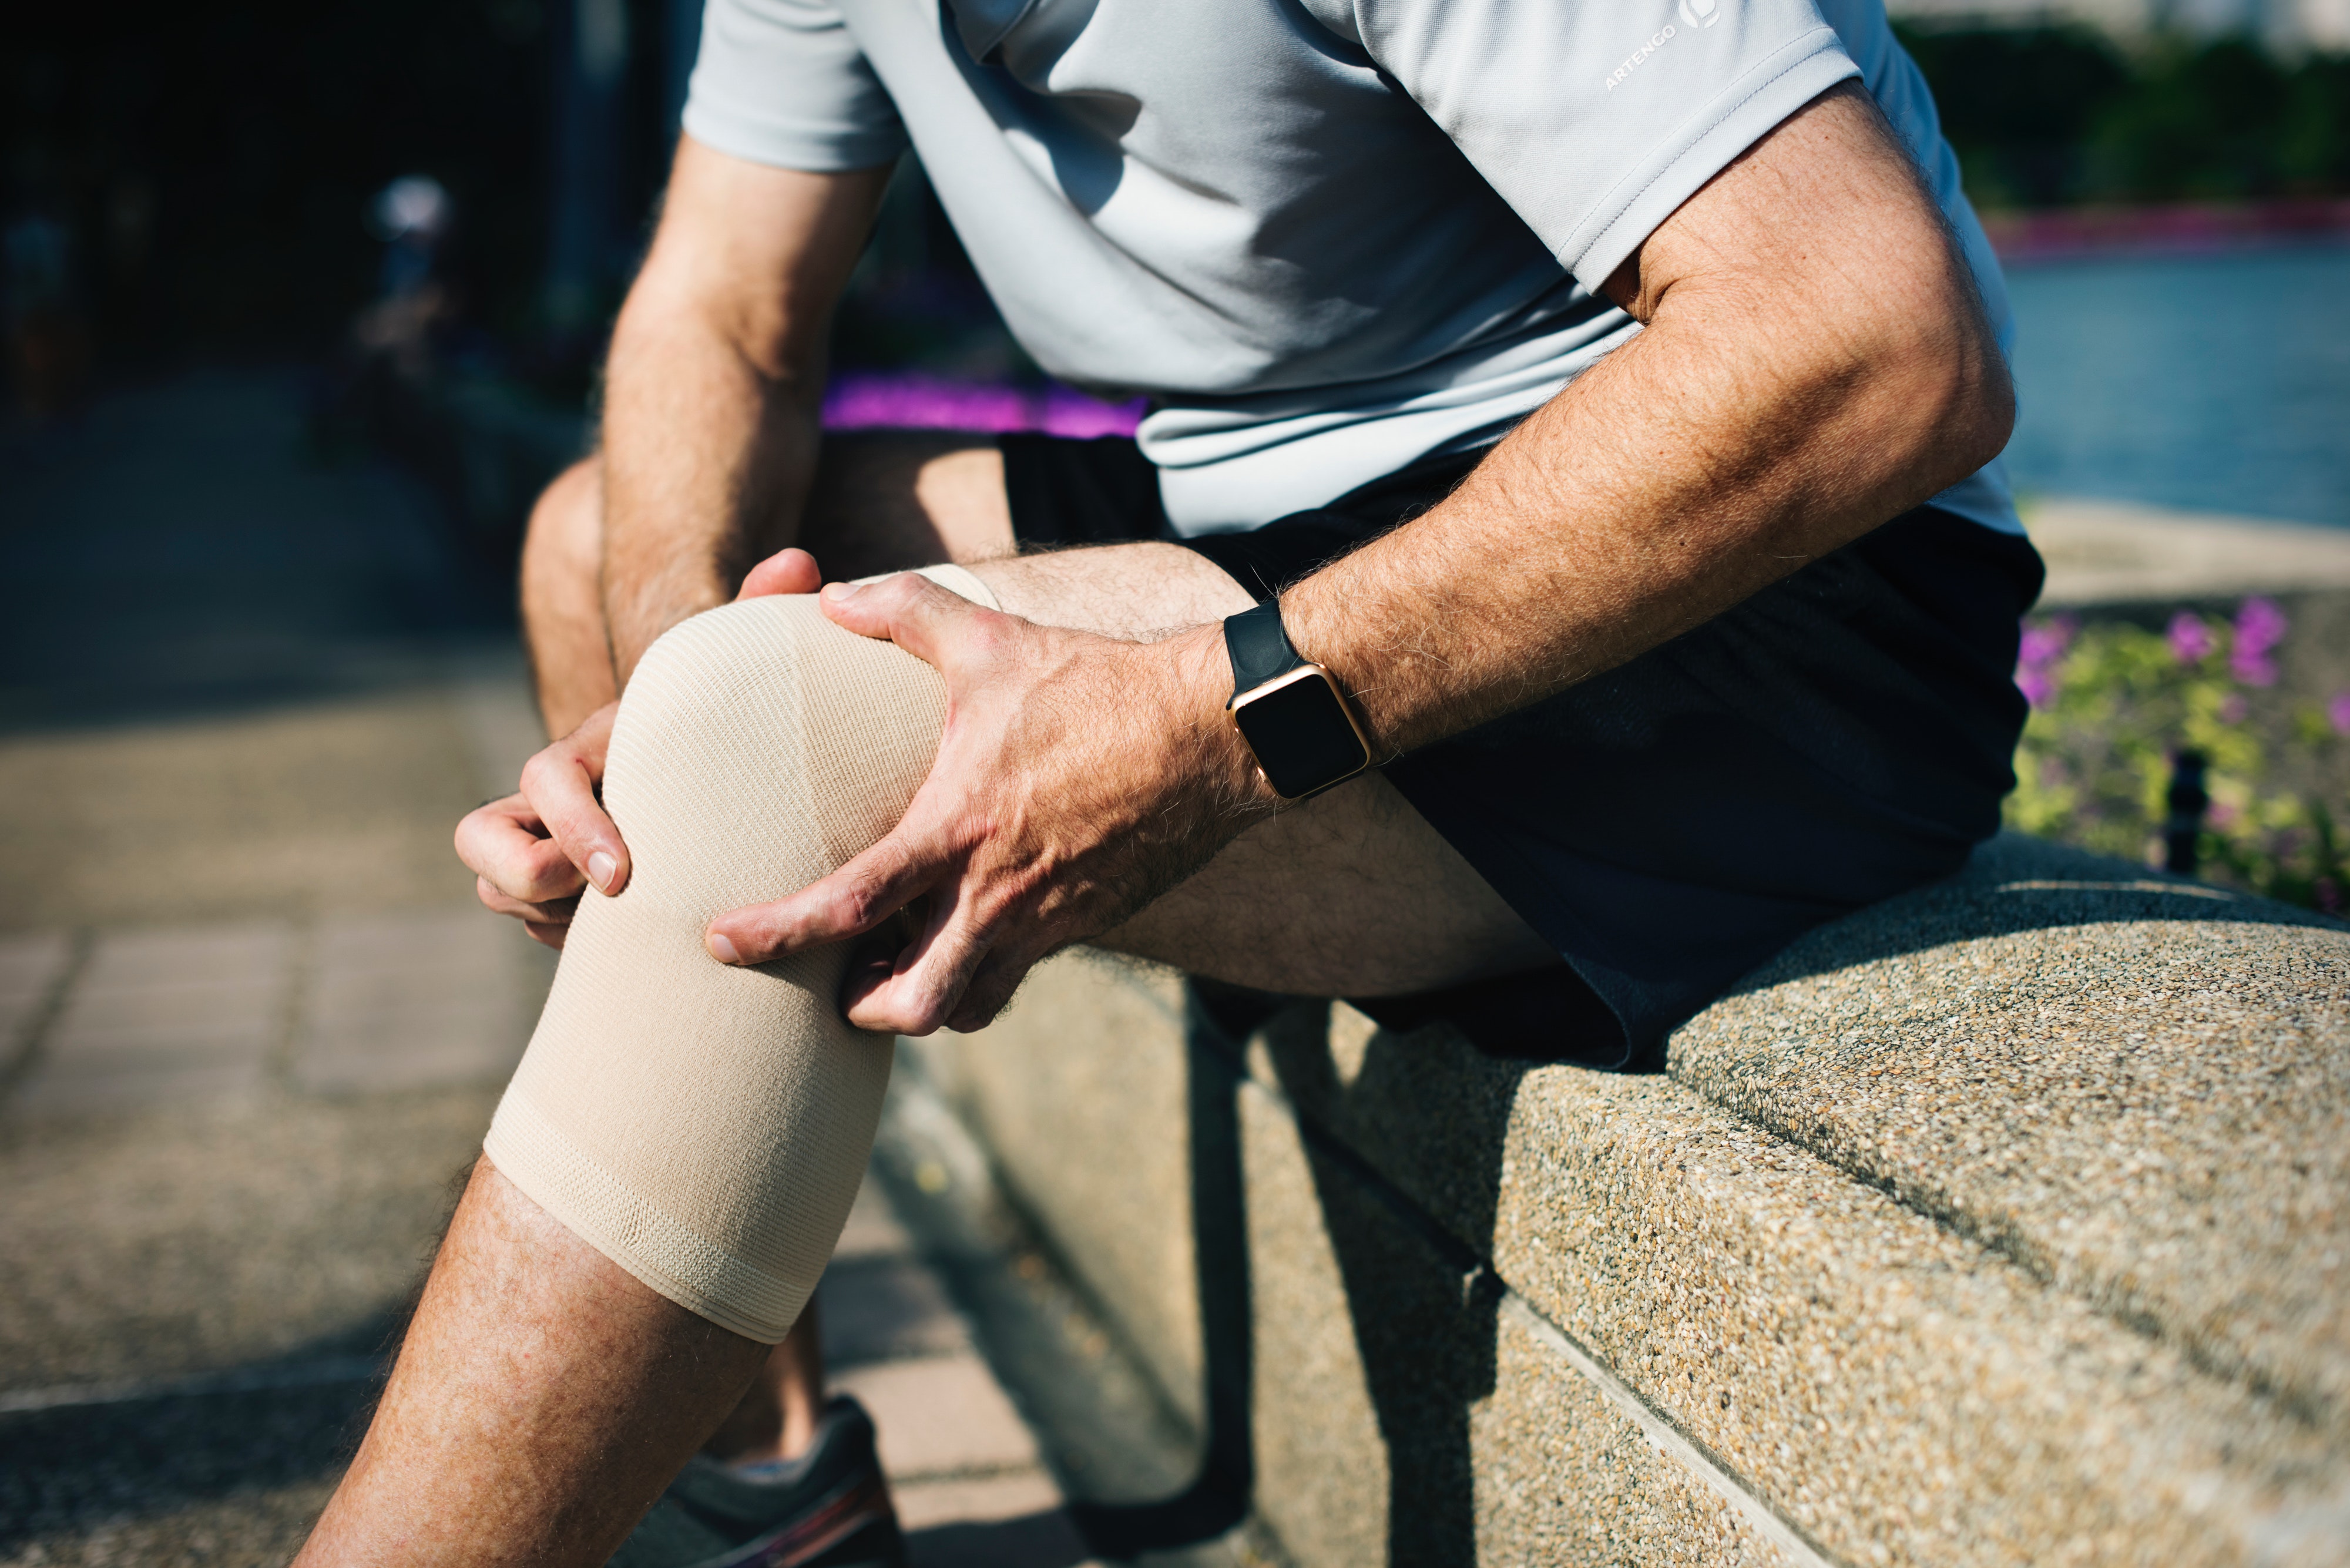 What's The Best Type of Brace For Knee Pain? - PainHero